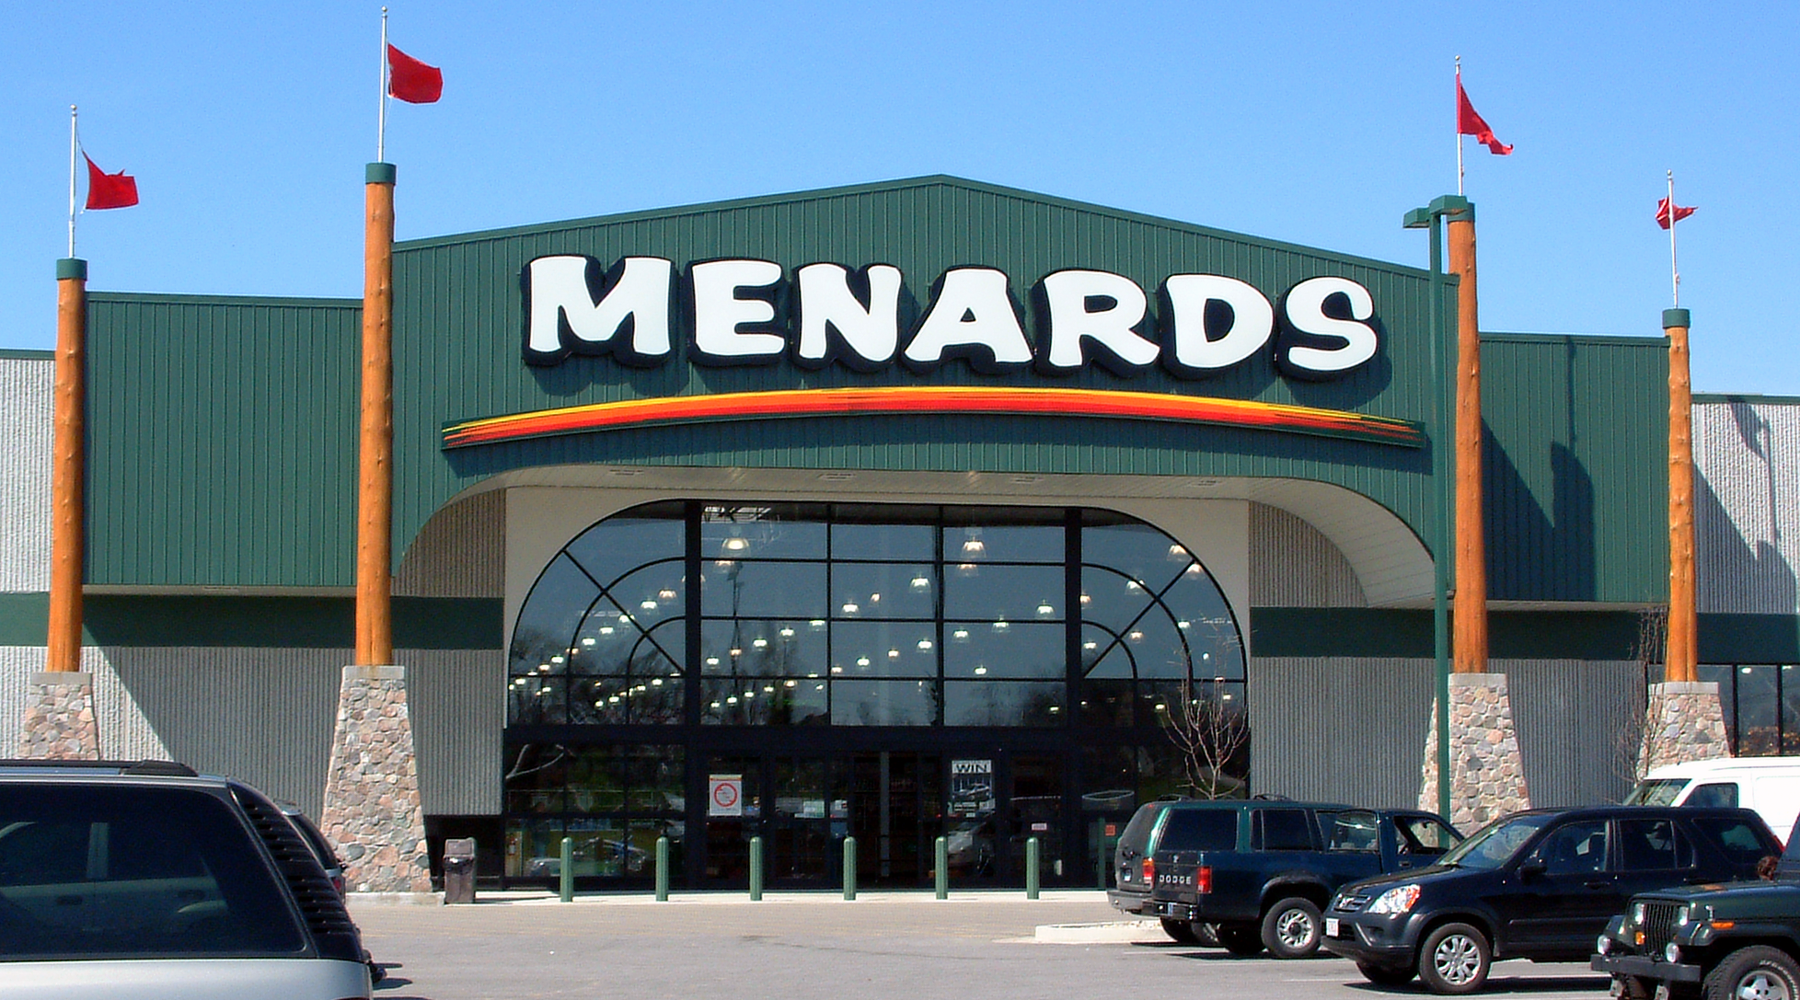 What time does Menards close